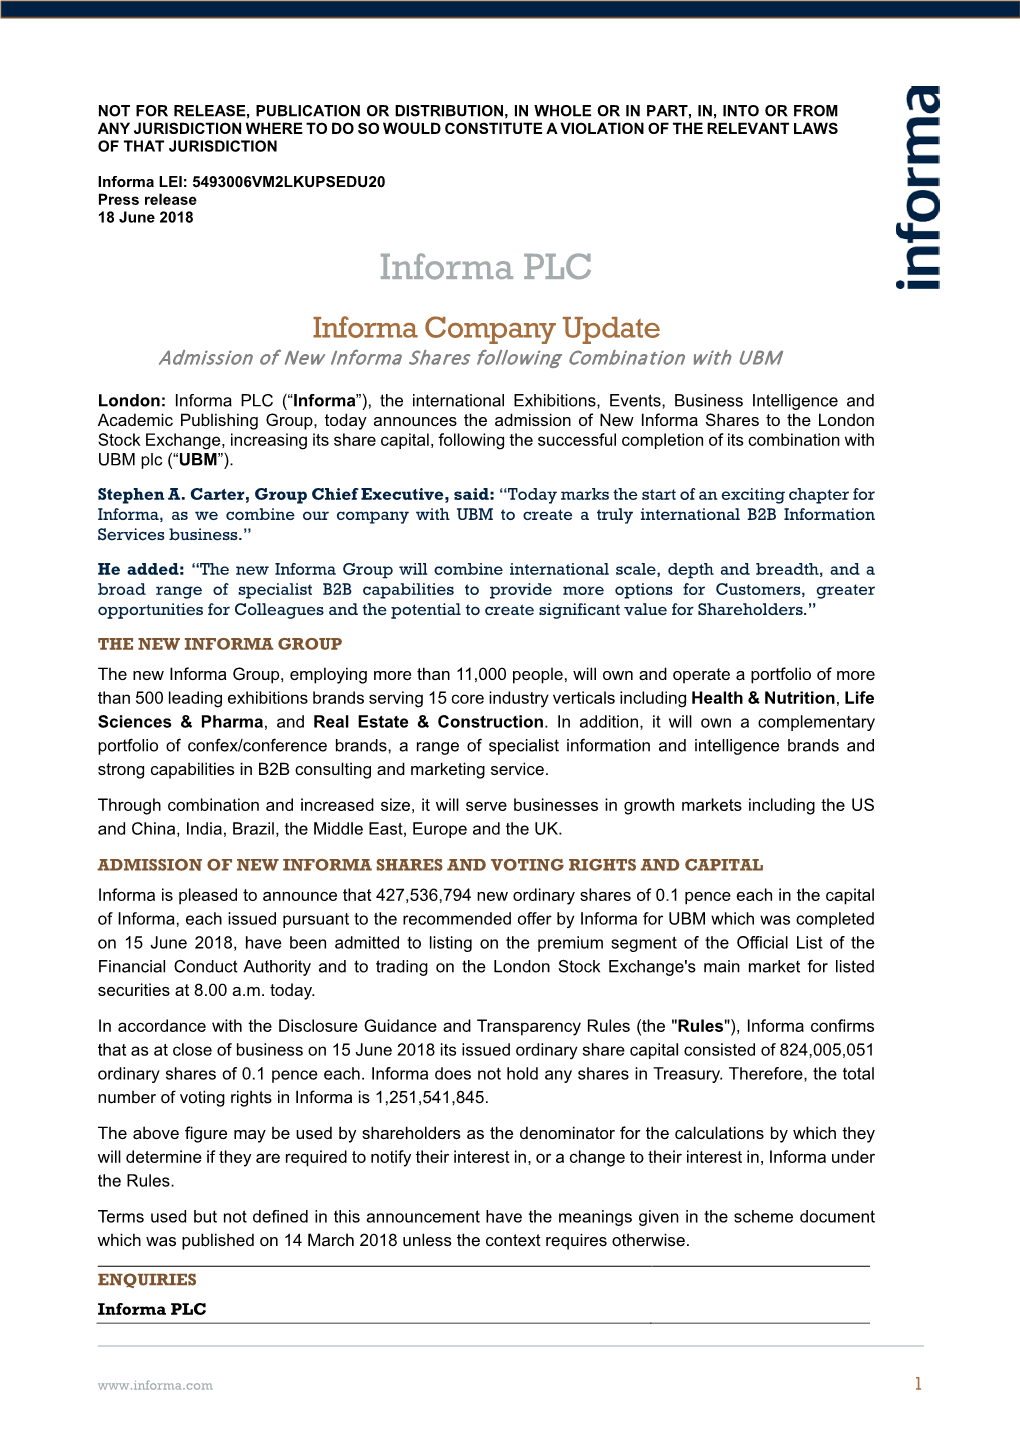 Admission of New Informa Shares Following Combination with UBM